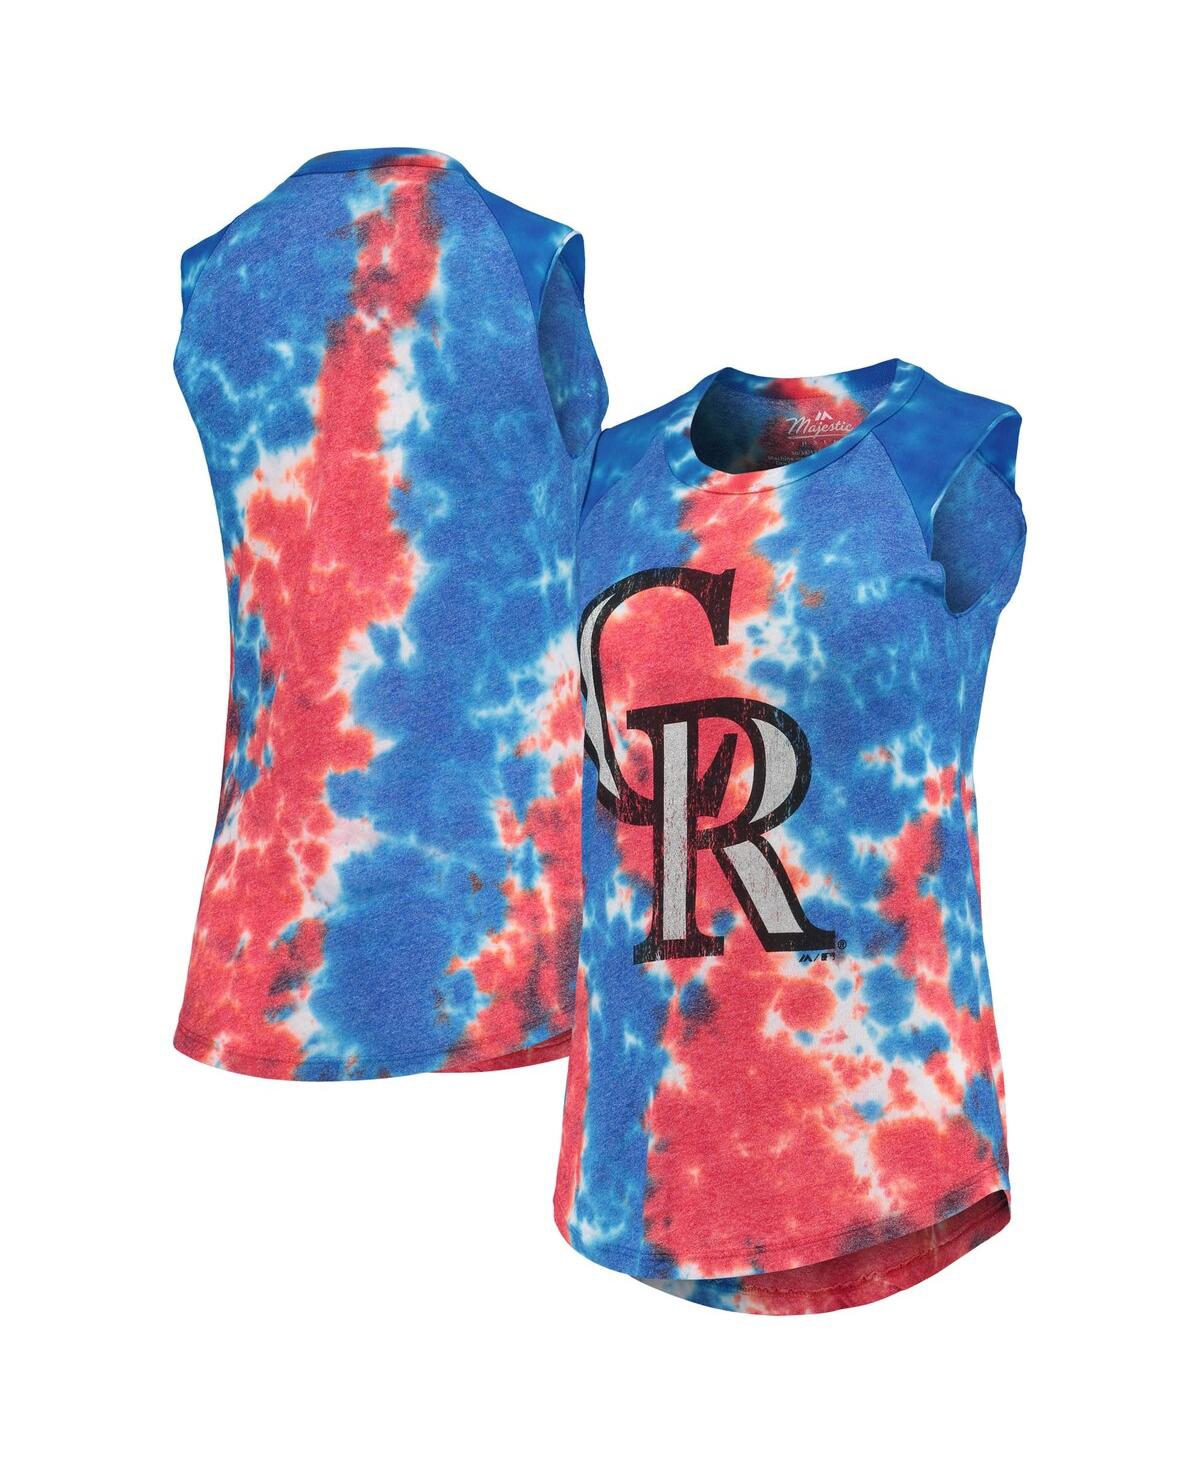 Women's Majestic Threads Red and Blue Colorado Rockies Tie-Dye Tri-Blend Muscle Tank Top - Red, Blue